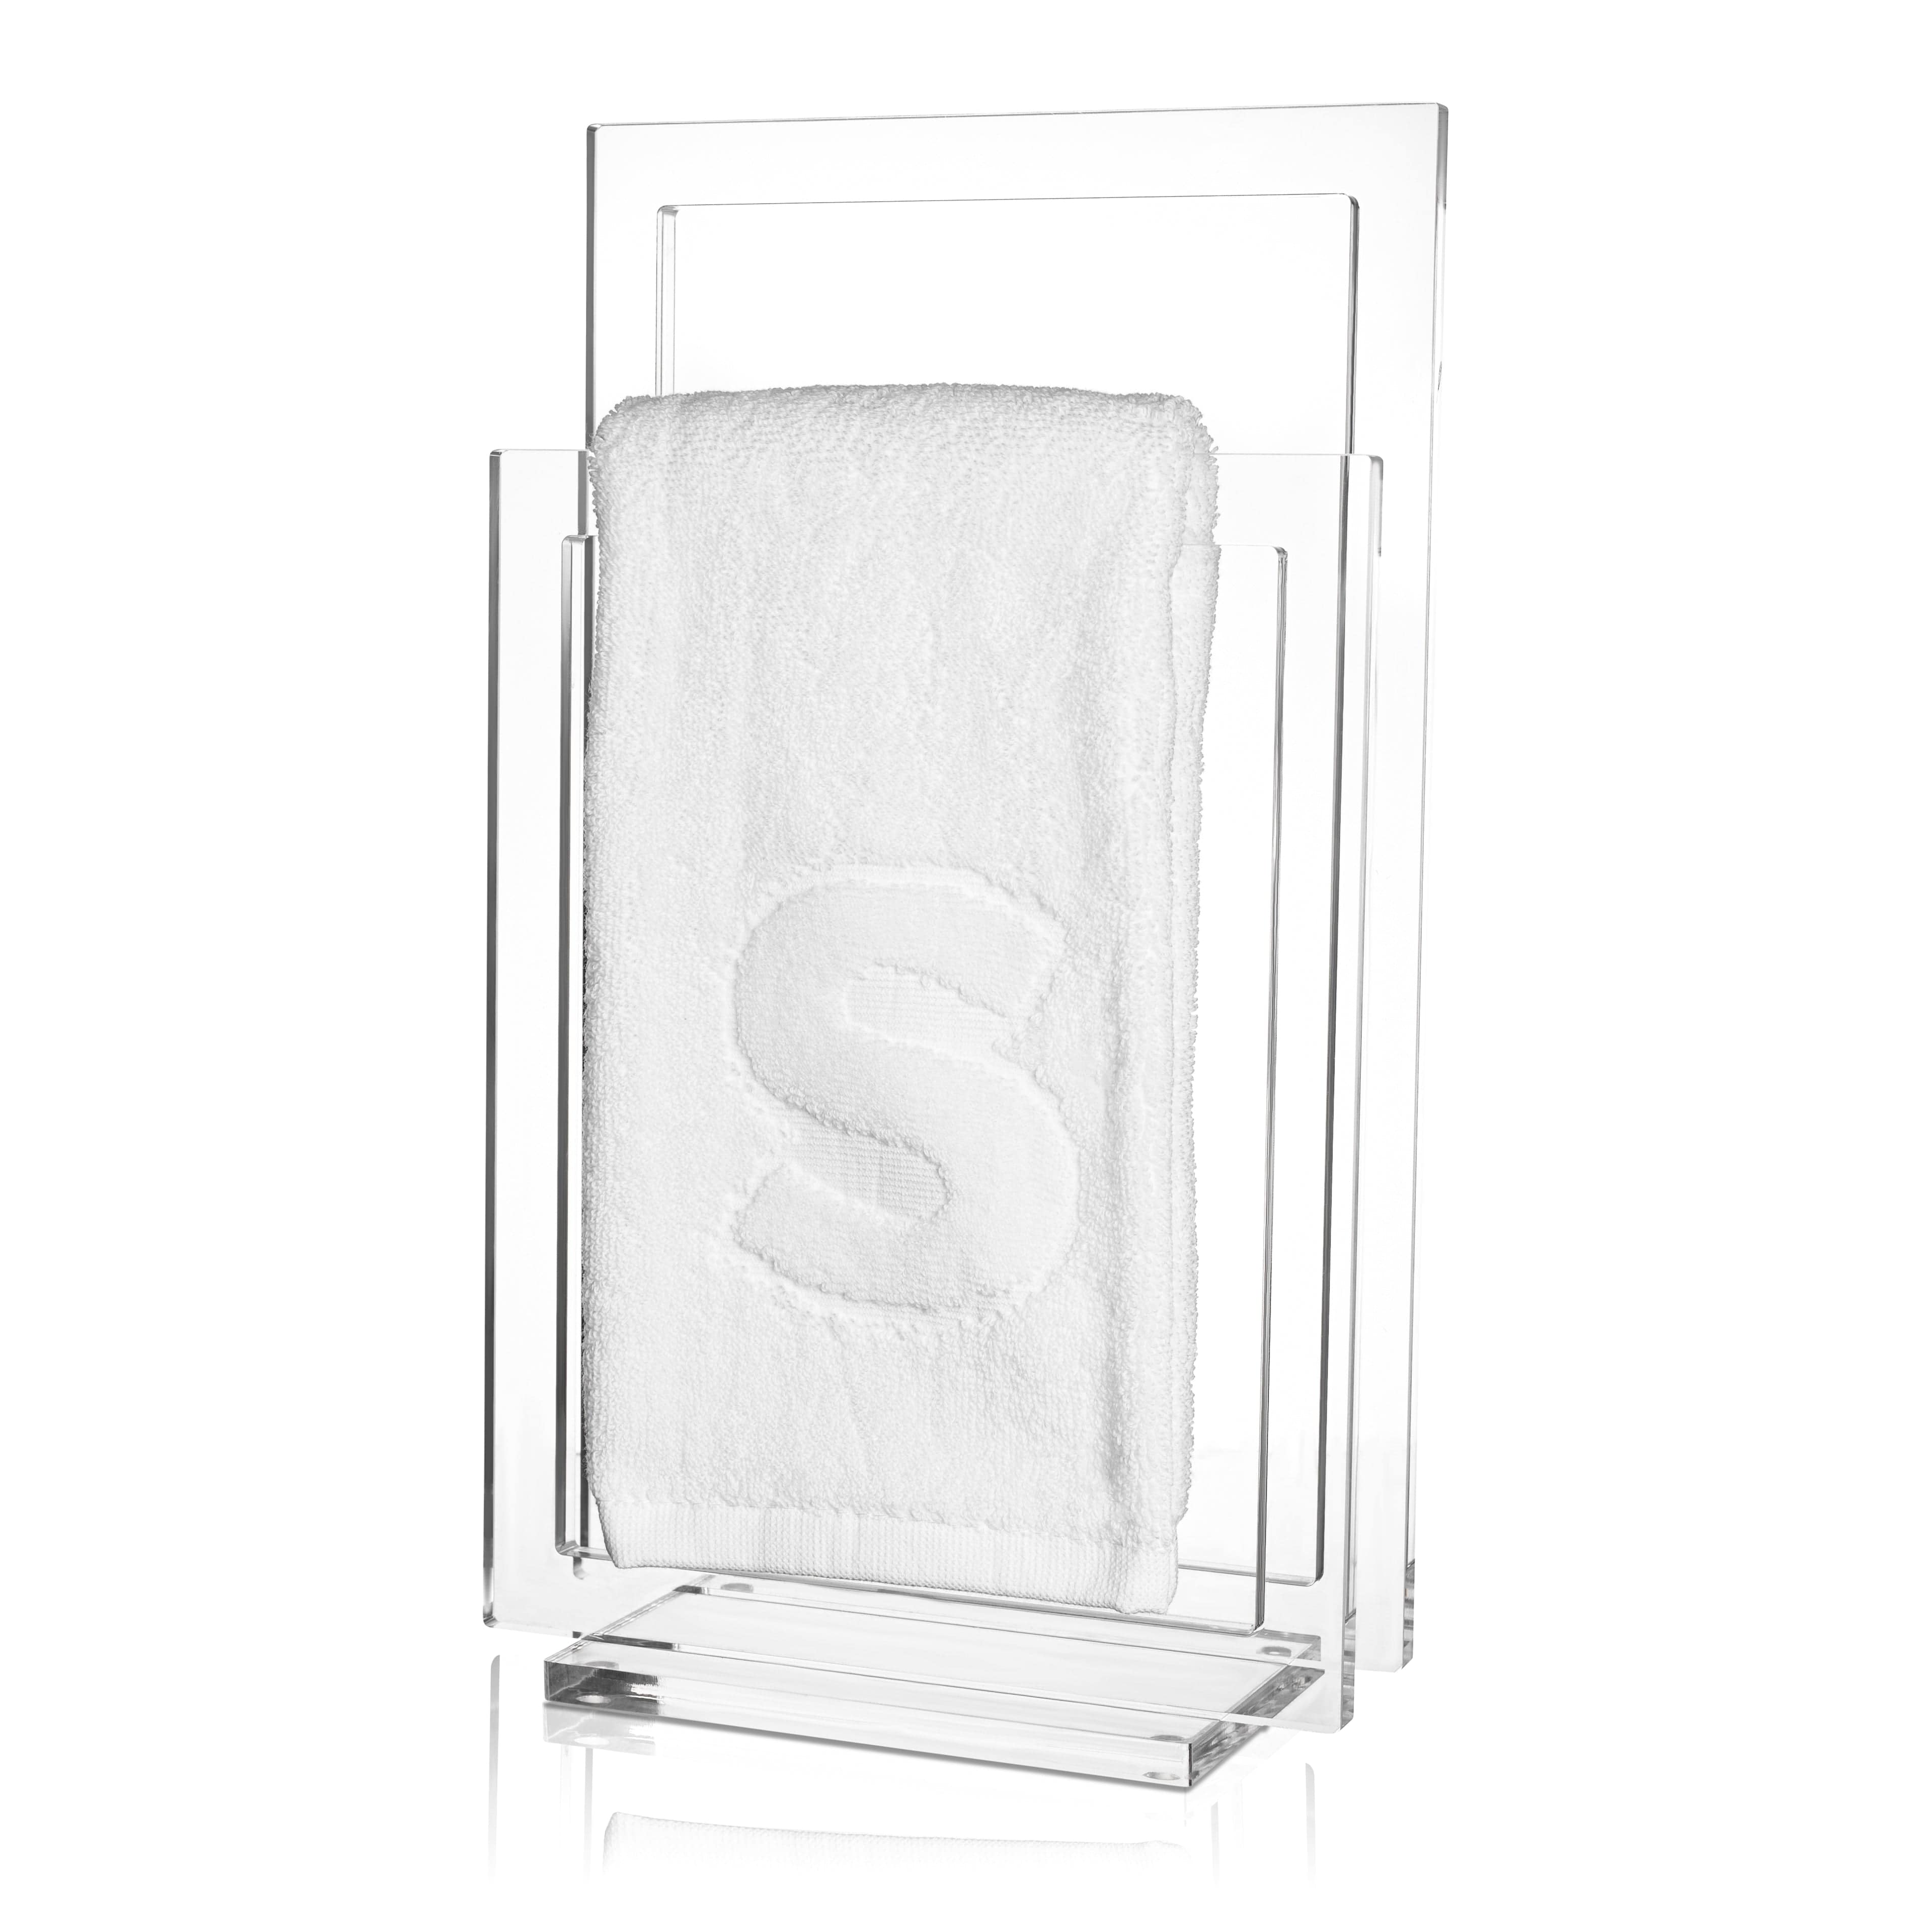 Mishloach Manos - Towel Stand - Waterdale Collection